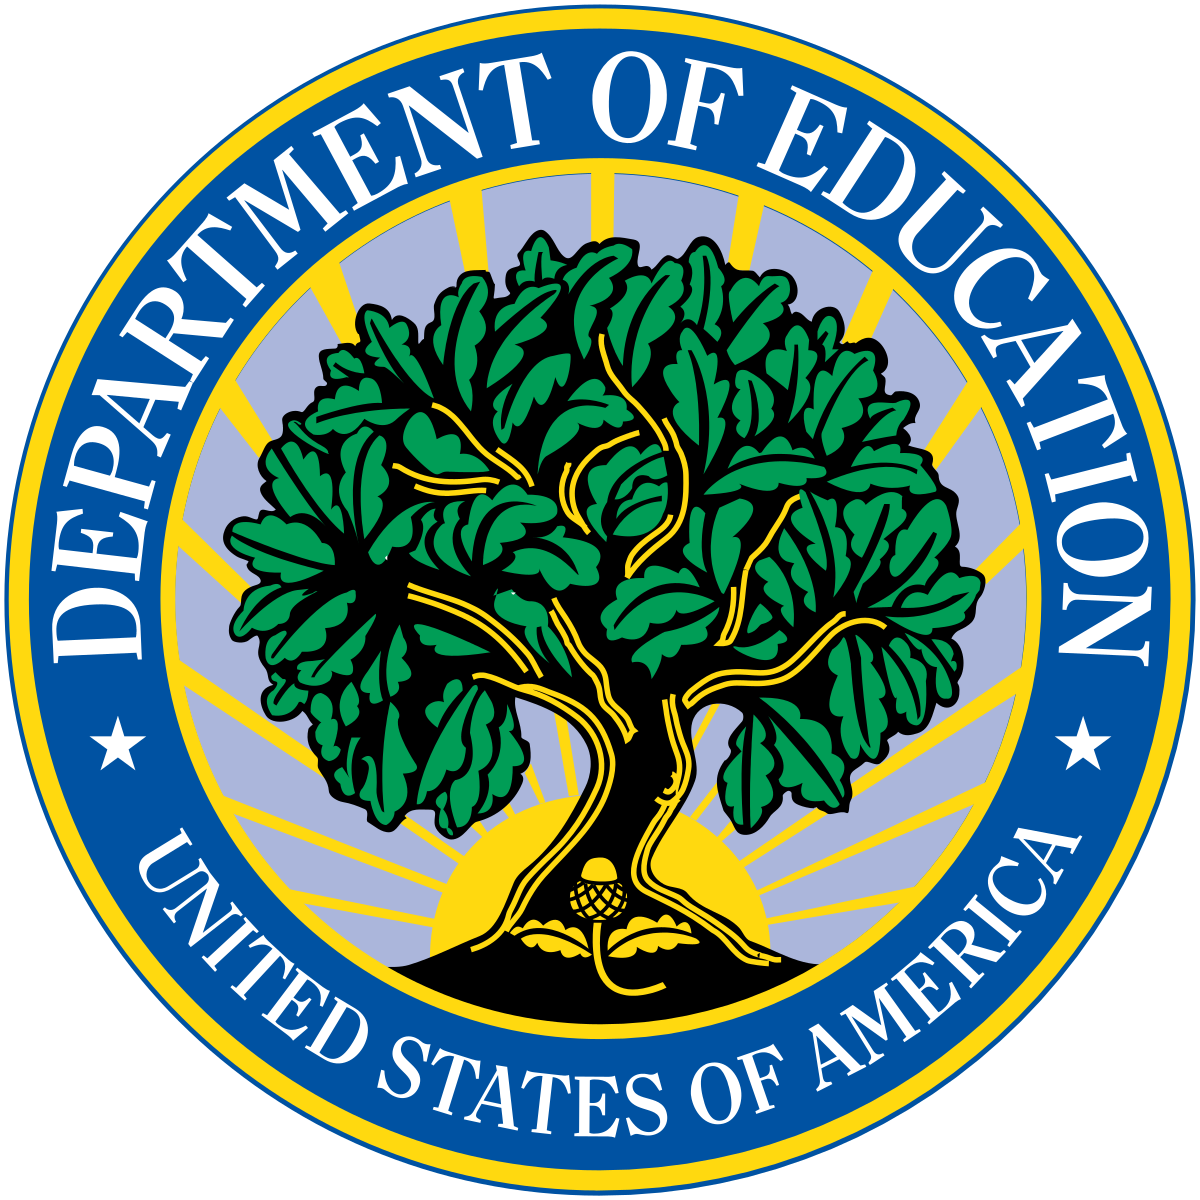 image of the seal of the US Department of Education